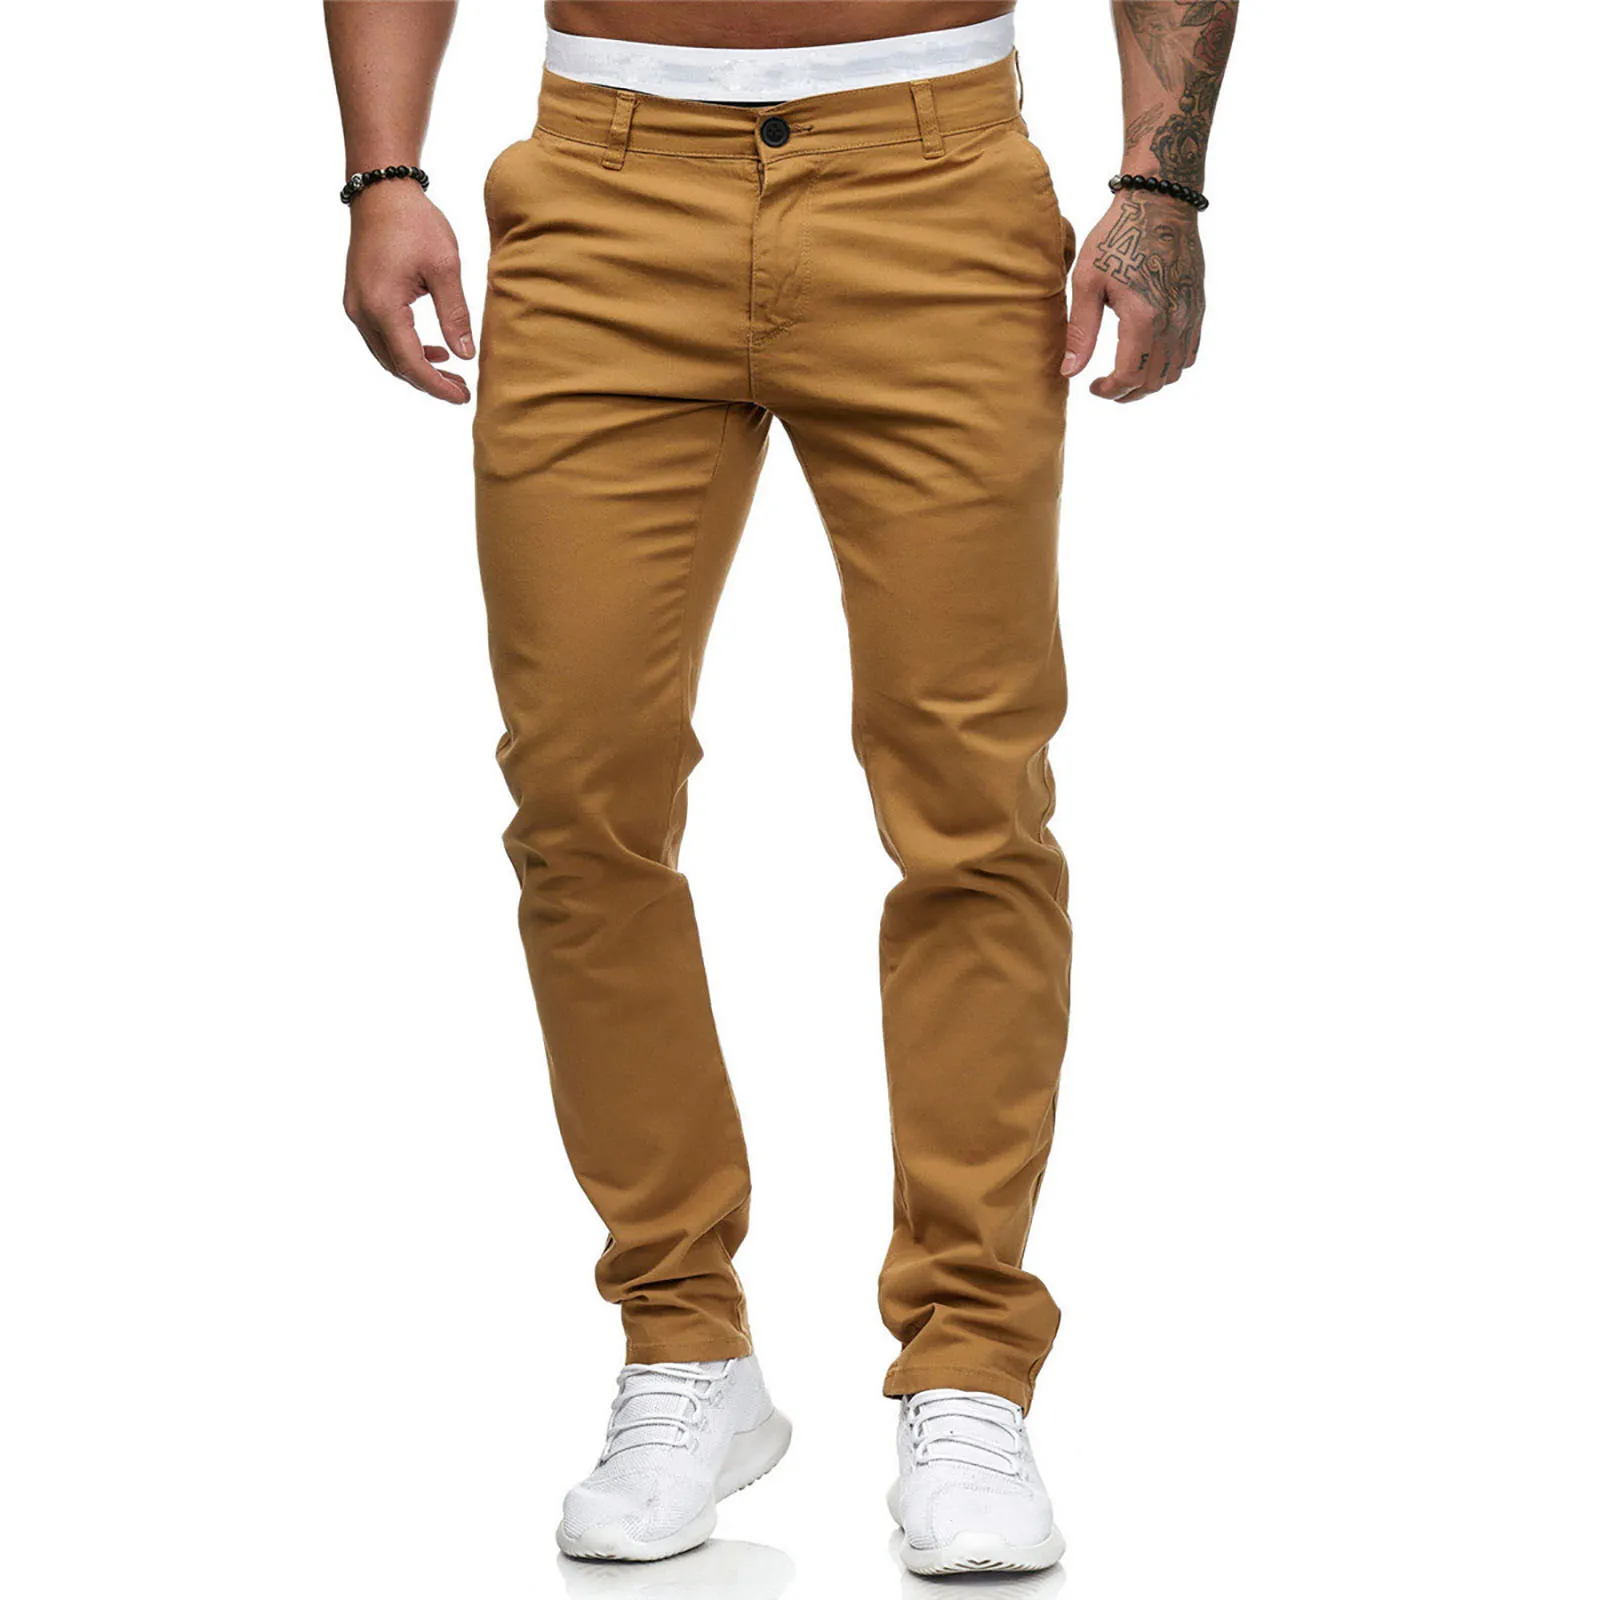 

Men Pants Fashion Casual Mid Waist Slim Pant Solid Pocket Full Length Pantalon Homme Male Clothes Trousers Cargo Baggy Solid